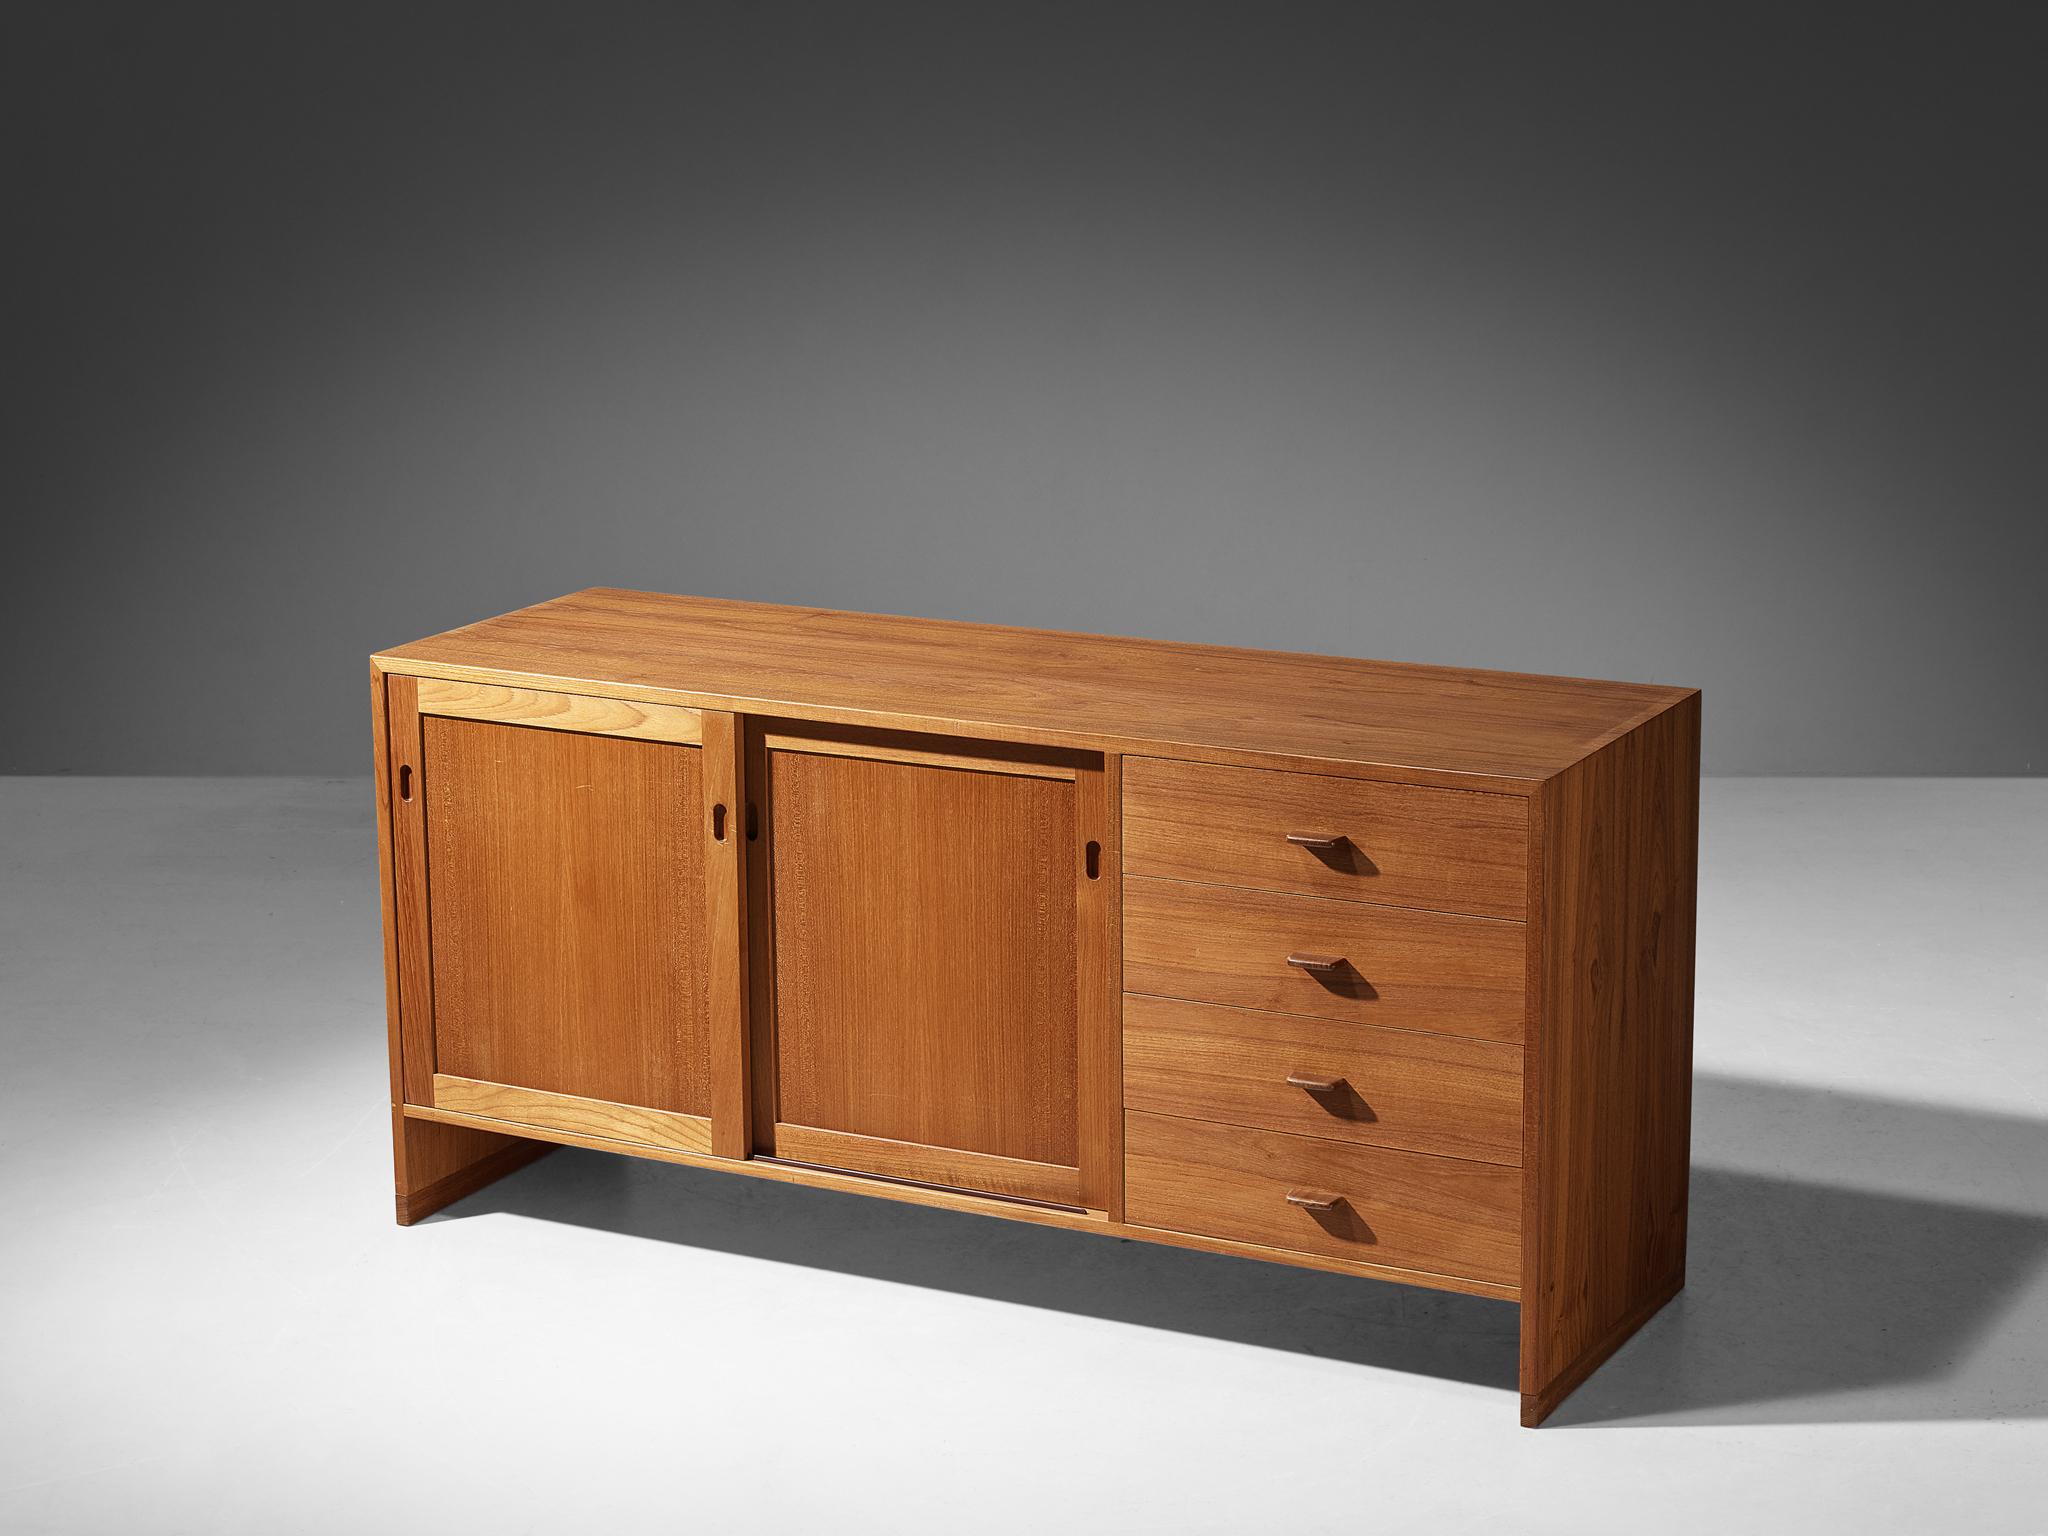 Hans J. Wegner for Ry Møbler, sideboard model 'RY100', teak, oak, maple, Denmark, 1960

Both aesthetics and functionality come into play in this eloquent credenza; elegant in line and practical to use for any environment. Four drawers and a